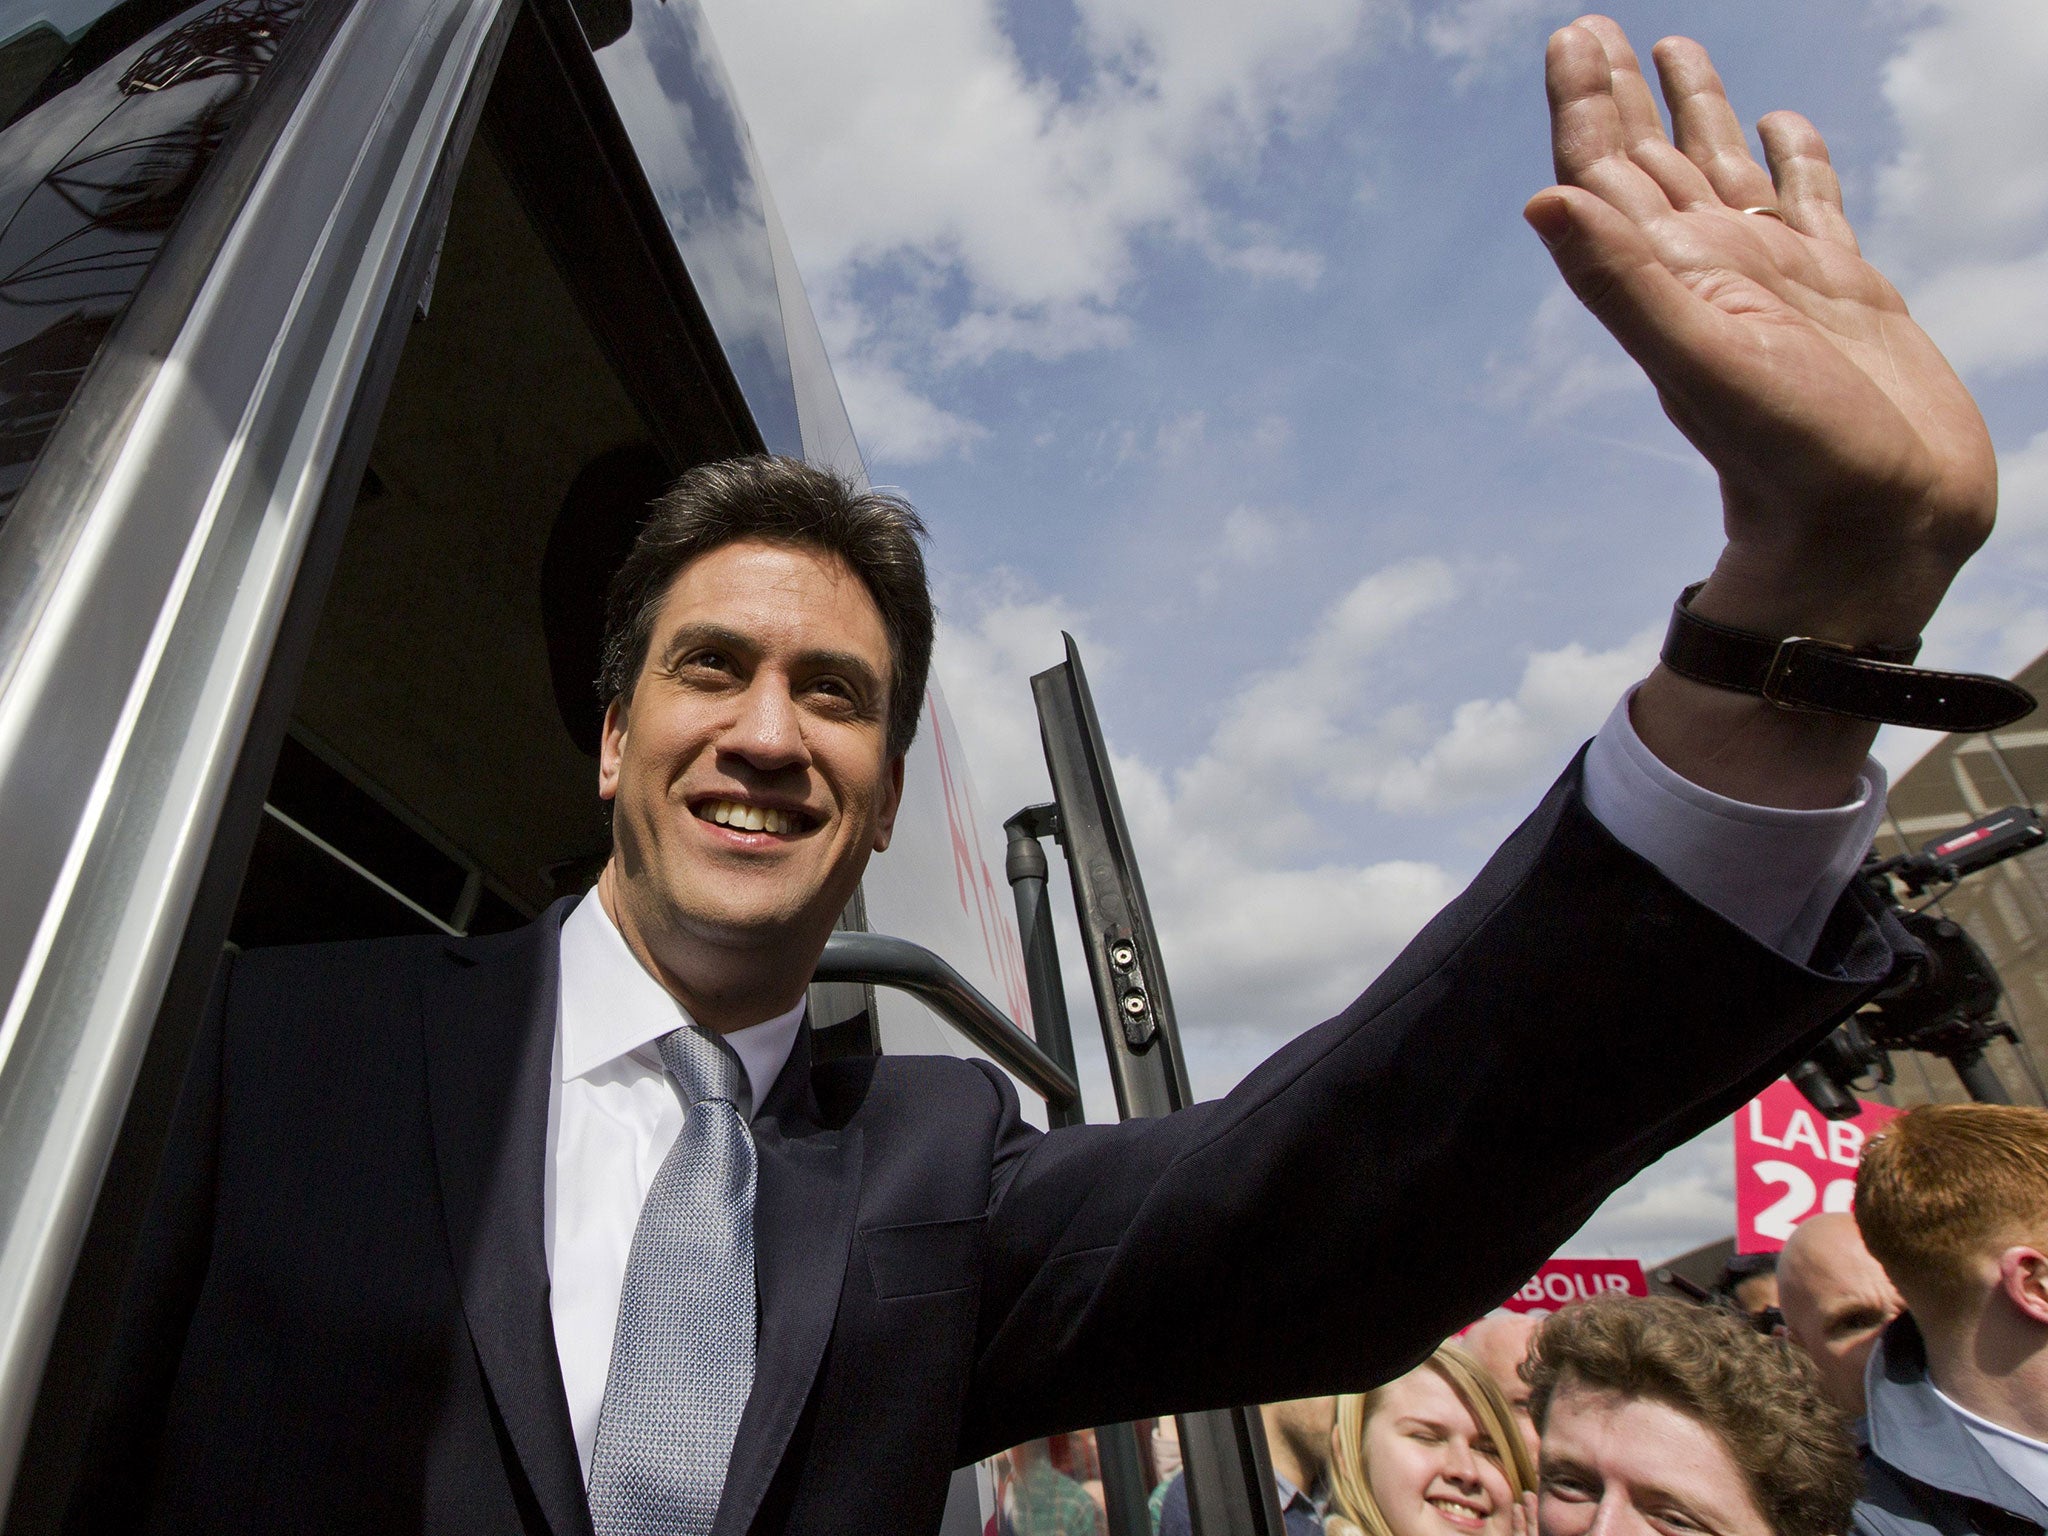 Ed Miliband has ruled out forming a Coalition with the SNP